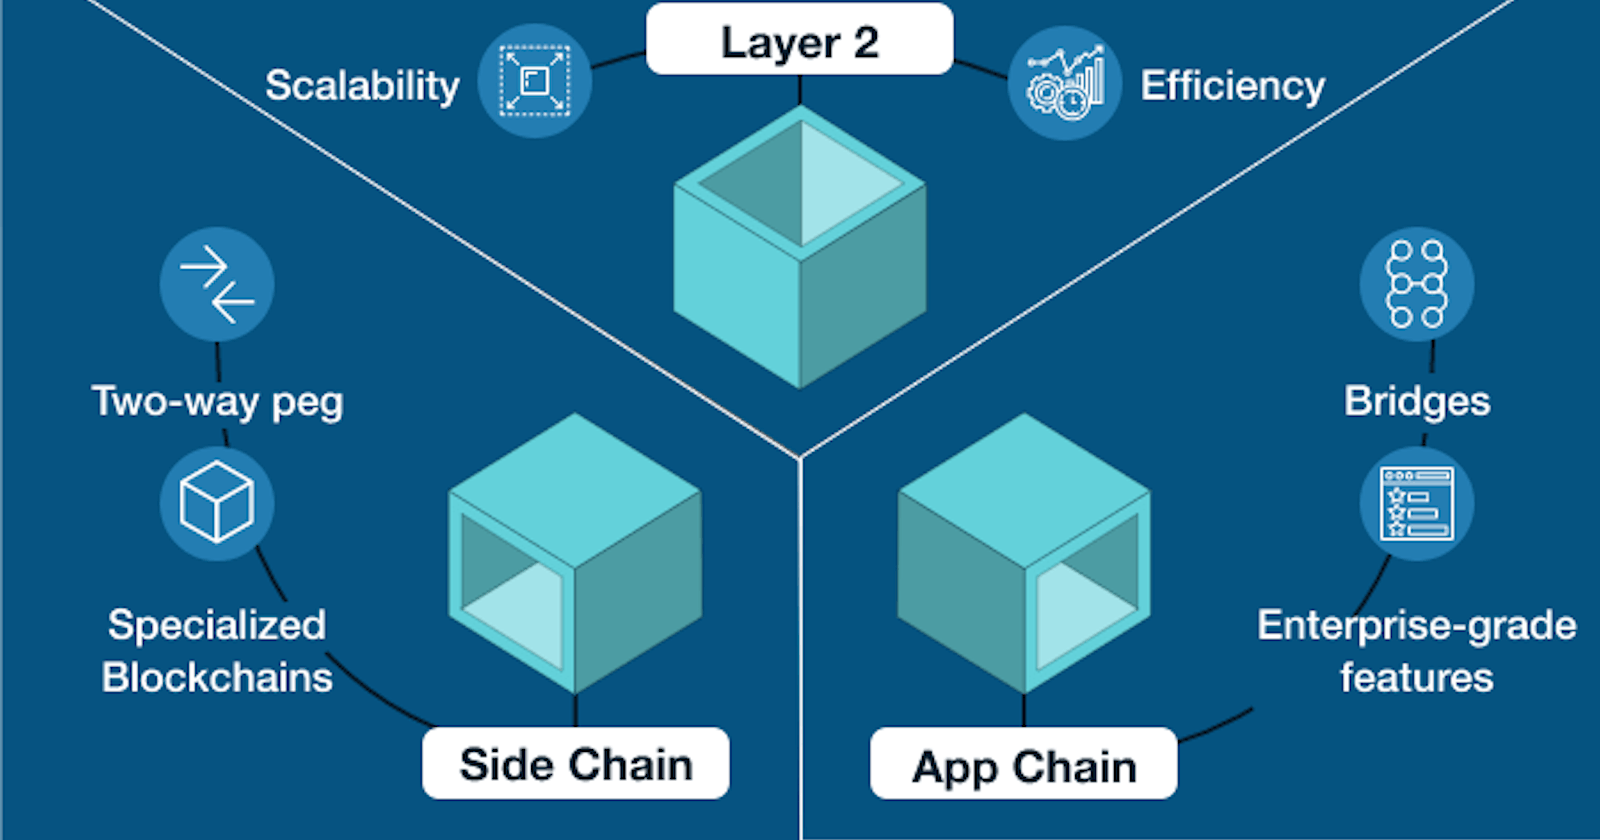 What exactly are layer-2 Ethereum scaling solutions?